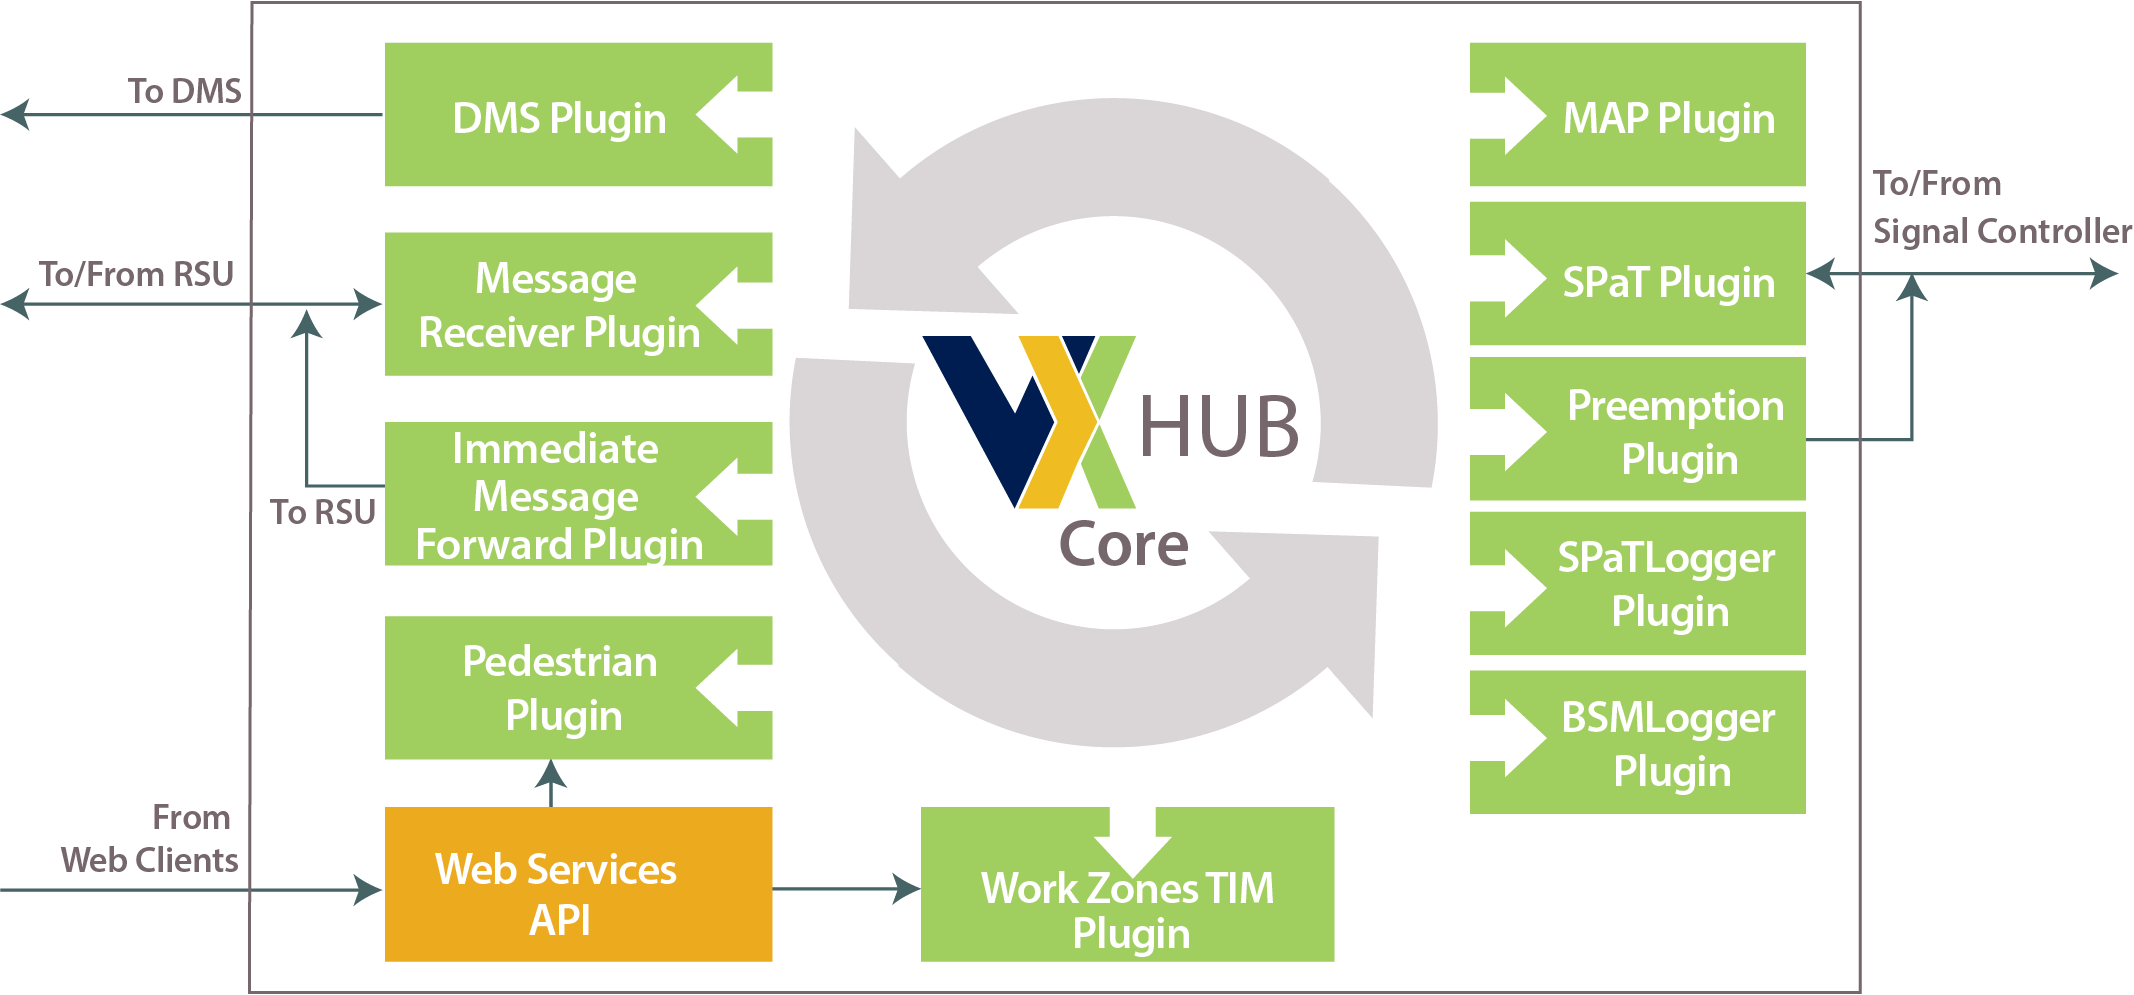 Diagram illustrates the array of plugins developed for the V2X hub, including a DMS plugin (to DMS), Message receiver plugin (to/from RSU), immediate message forward plugin (to RSU), pedestrian plug in work zones TIM plugin, MAP plugin, SPaT plugin, Preemption plugin, SPaTLogger plugin, and SMLogger plugin. In addition, the Web services API takes dat from web clients and passes it forward to the pedestrian and Work Zones TIM plugins.